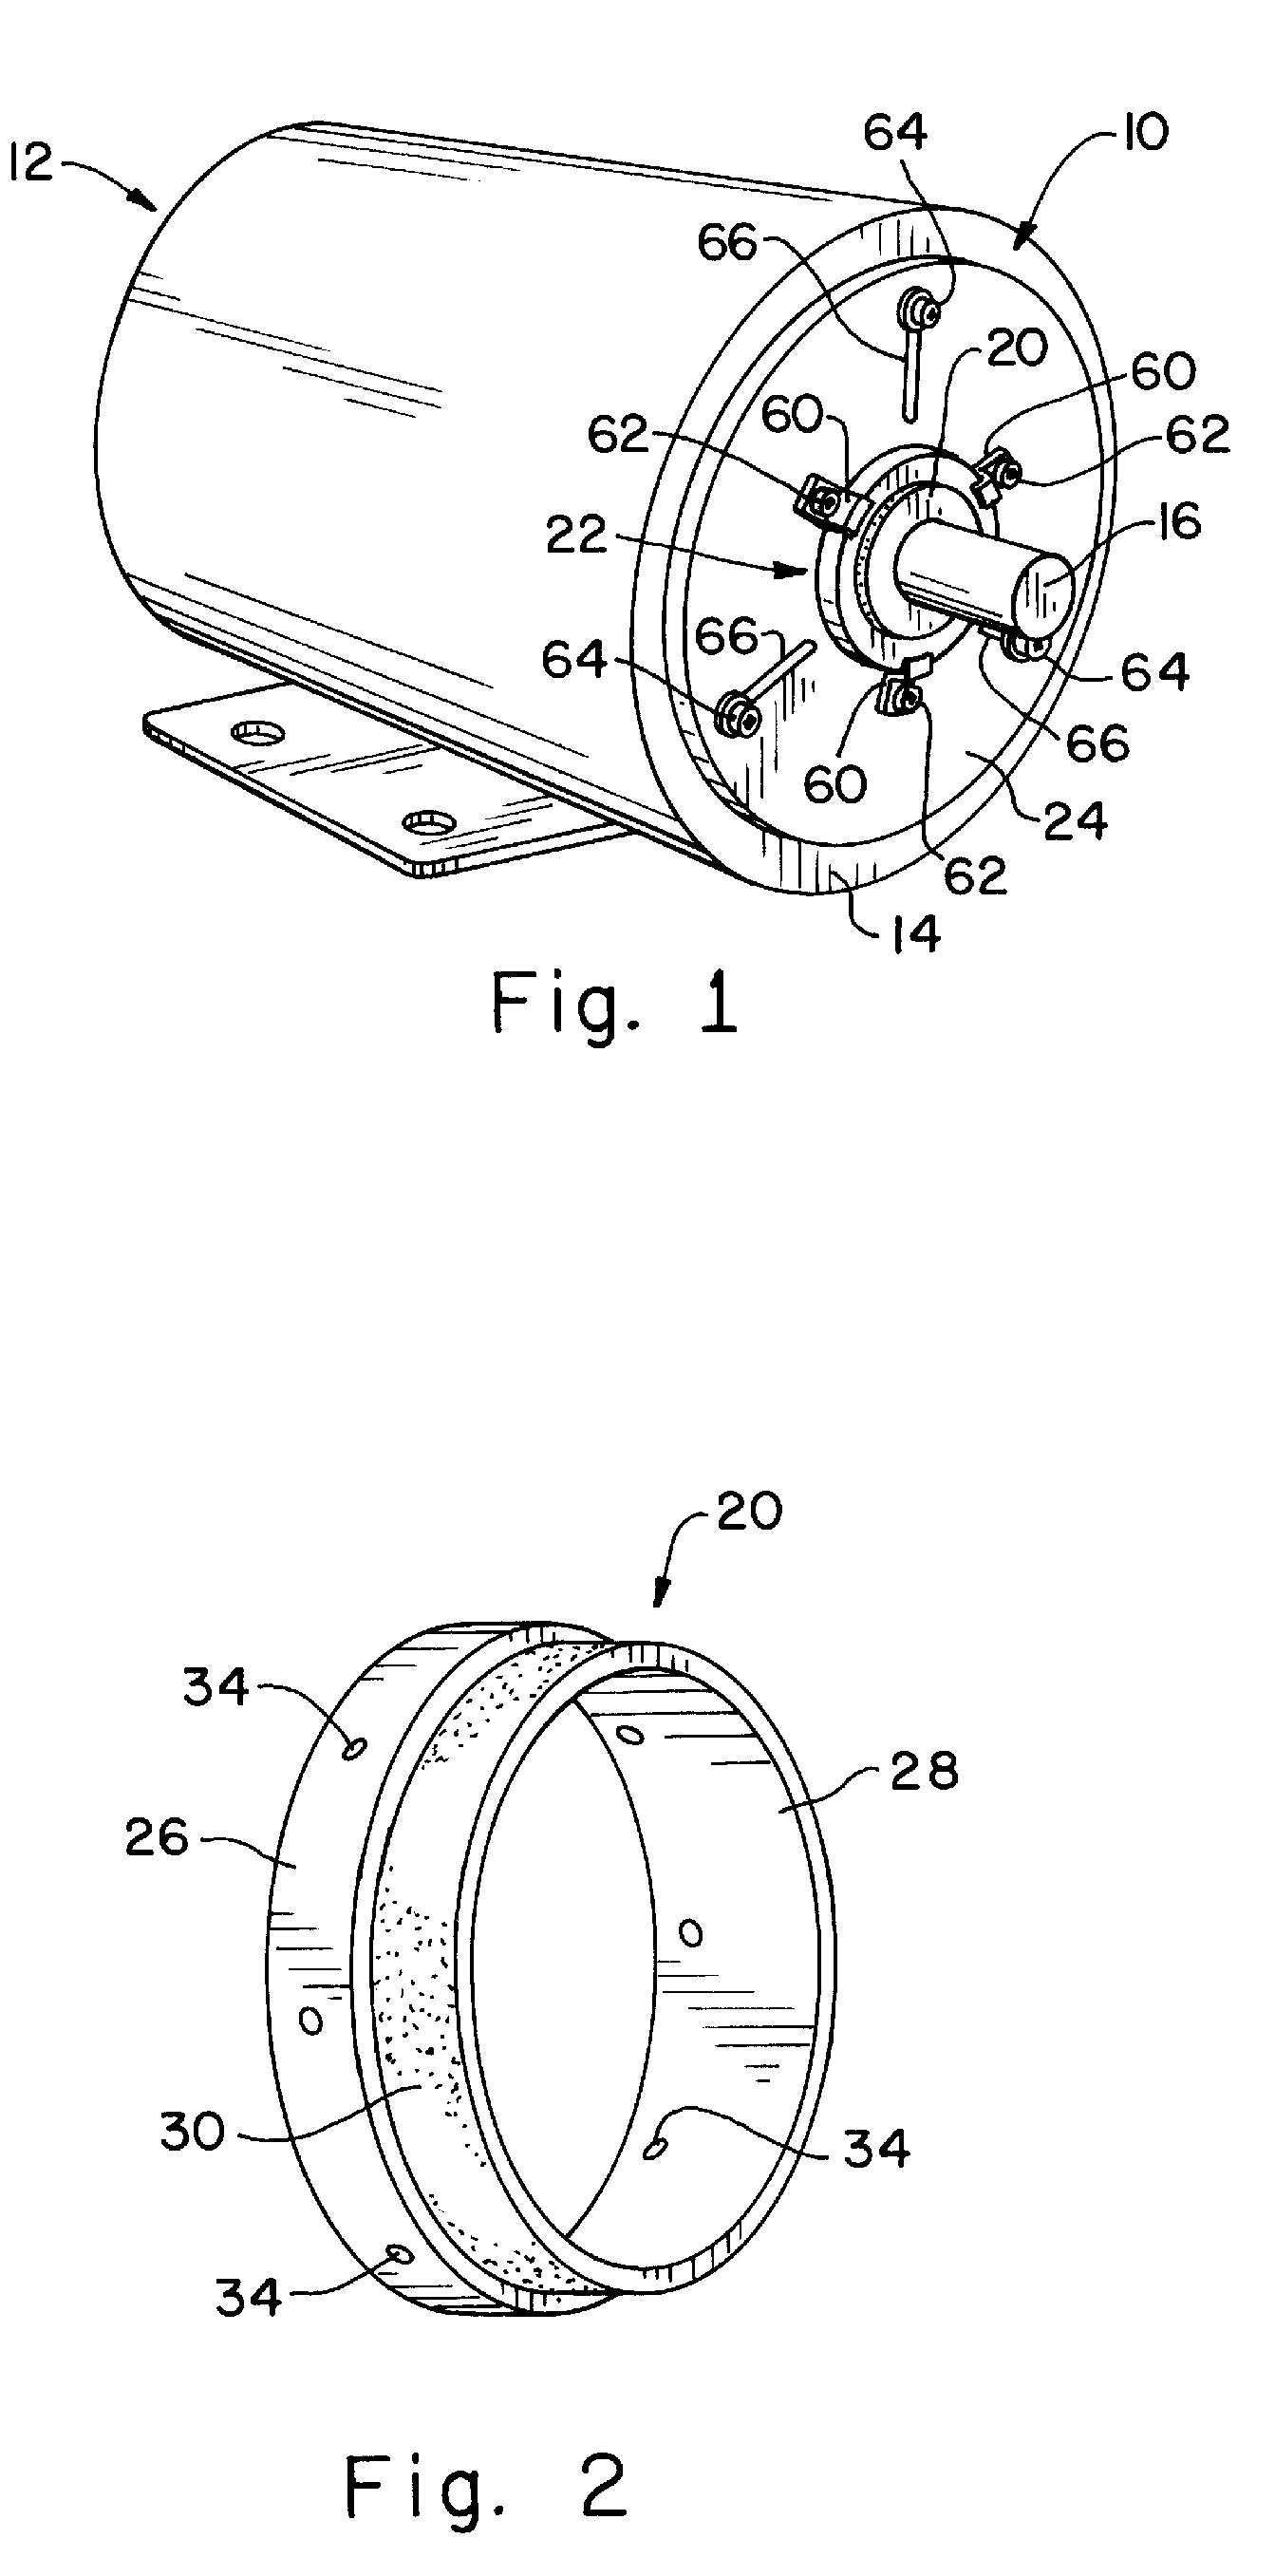 Grounding brush system for mitigating electrical current on rotating shafts